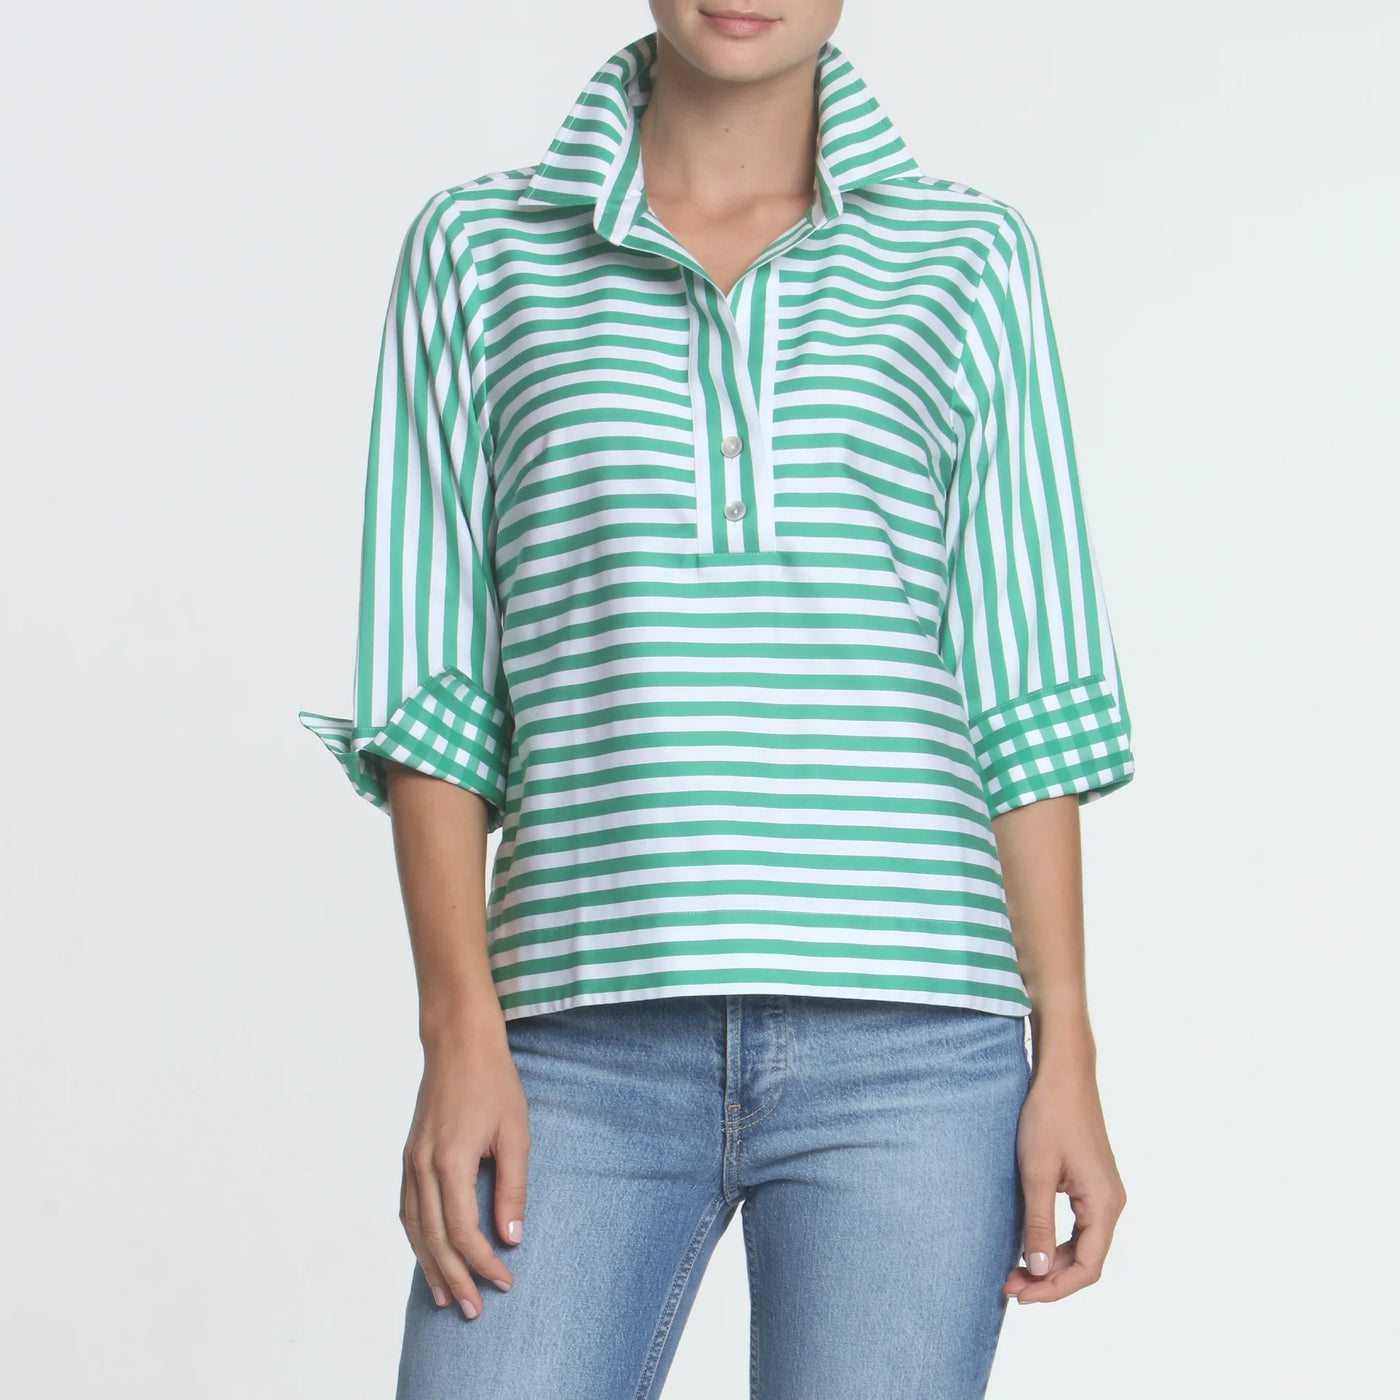 3/4 Sleeve Aileen Stripe with Gingham Cuff Top - Green/White